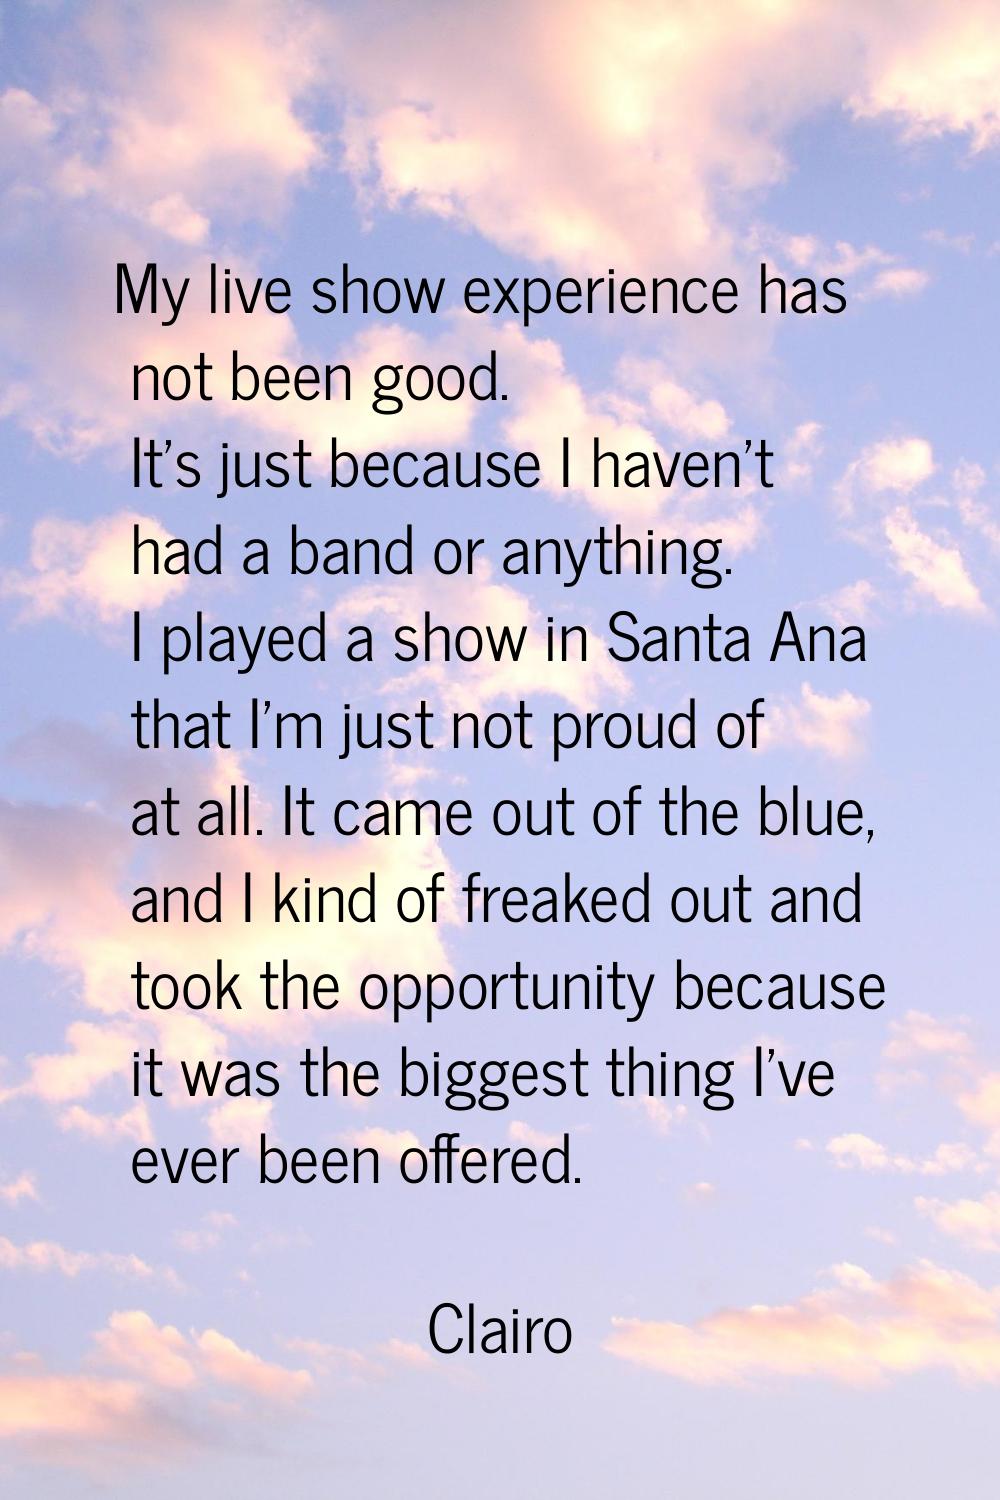 My live show experience has not been good. It's just because I haven't had a band or anything. I pl